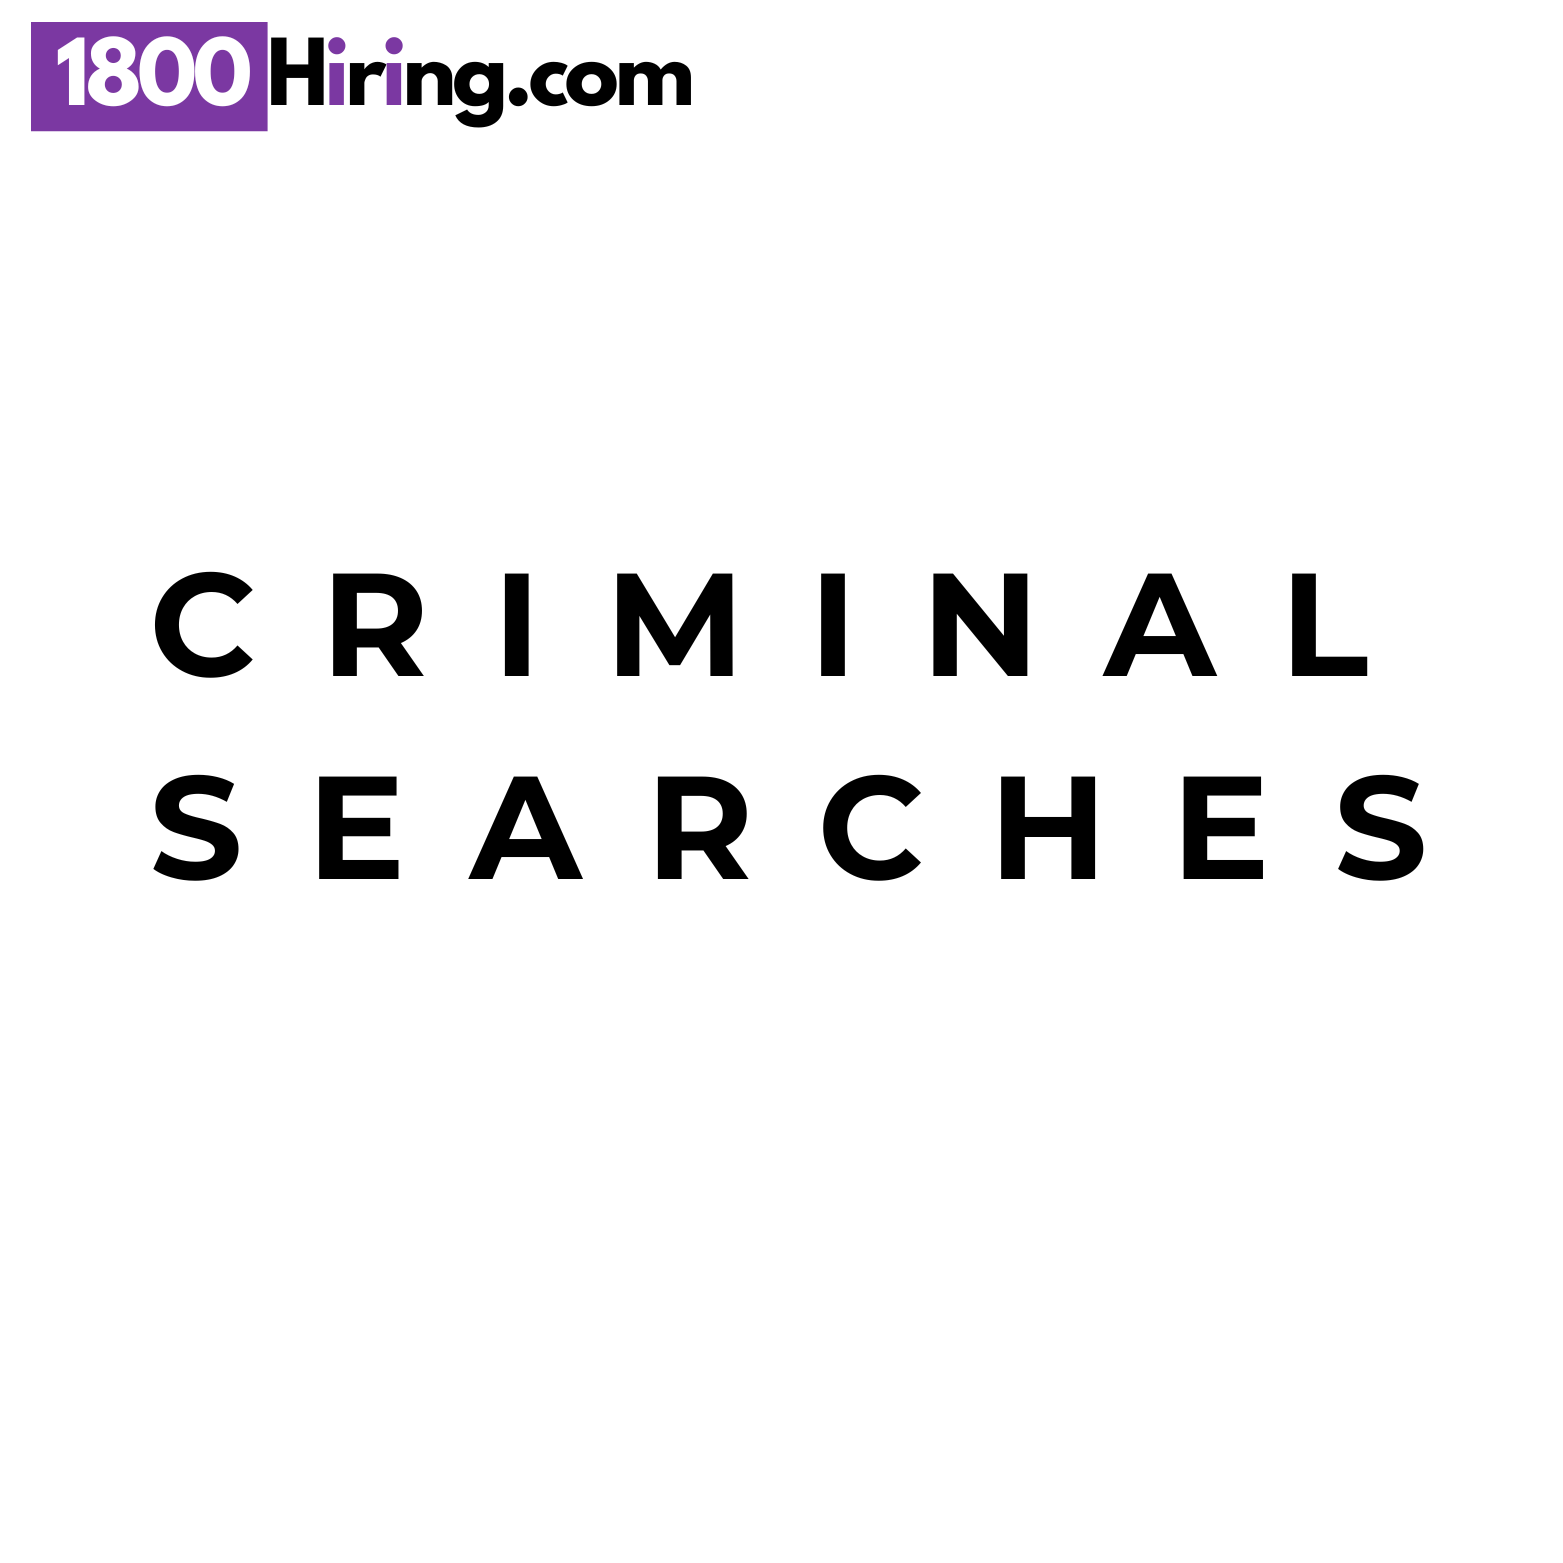 CRIMINAL BACKGROUND SEARCHES